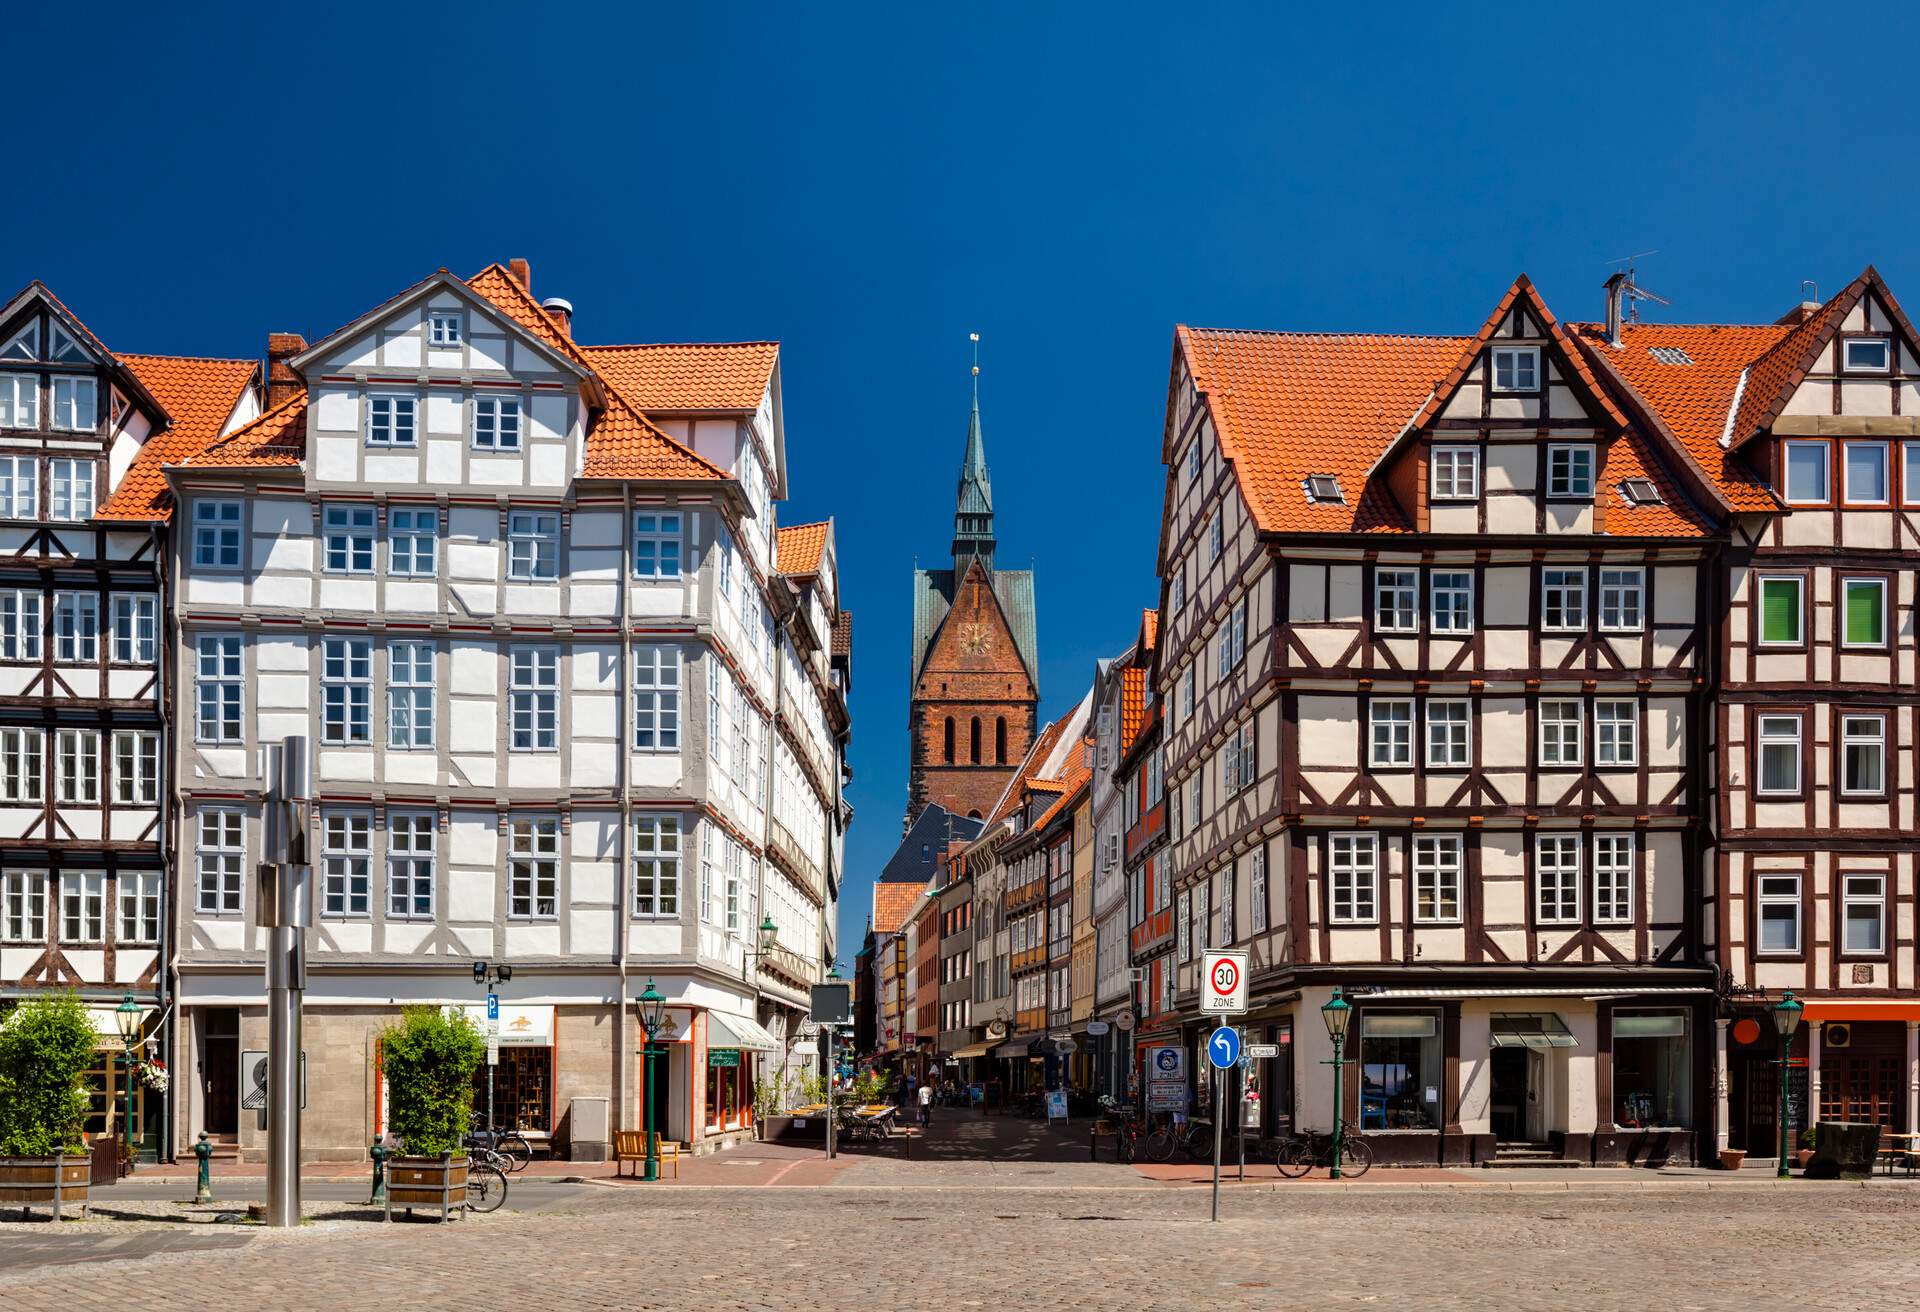 Half-timbered houses in the Old Town, the Market Church/Marktkirche is visible in the center - Hanover/Hannover, Germany.